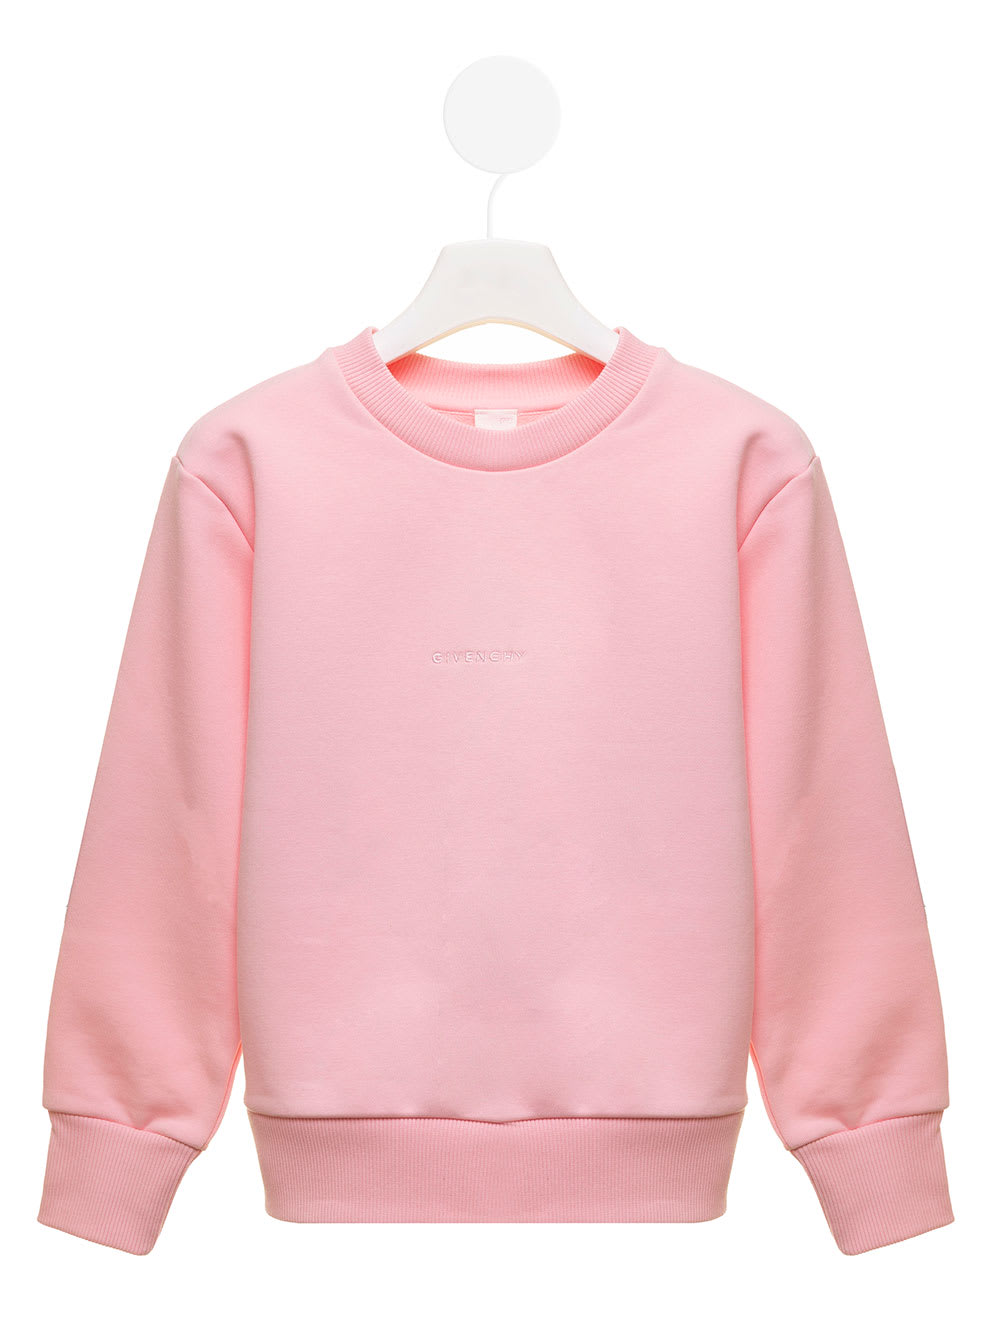 Givenchy Kids Girls Pink Sweatshirt With Back Embroidery